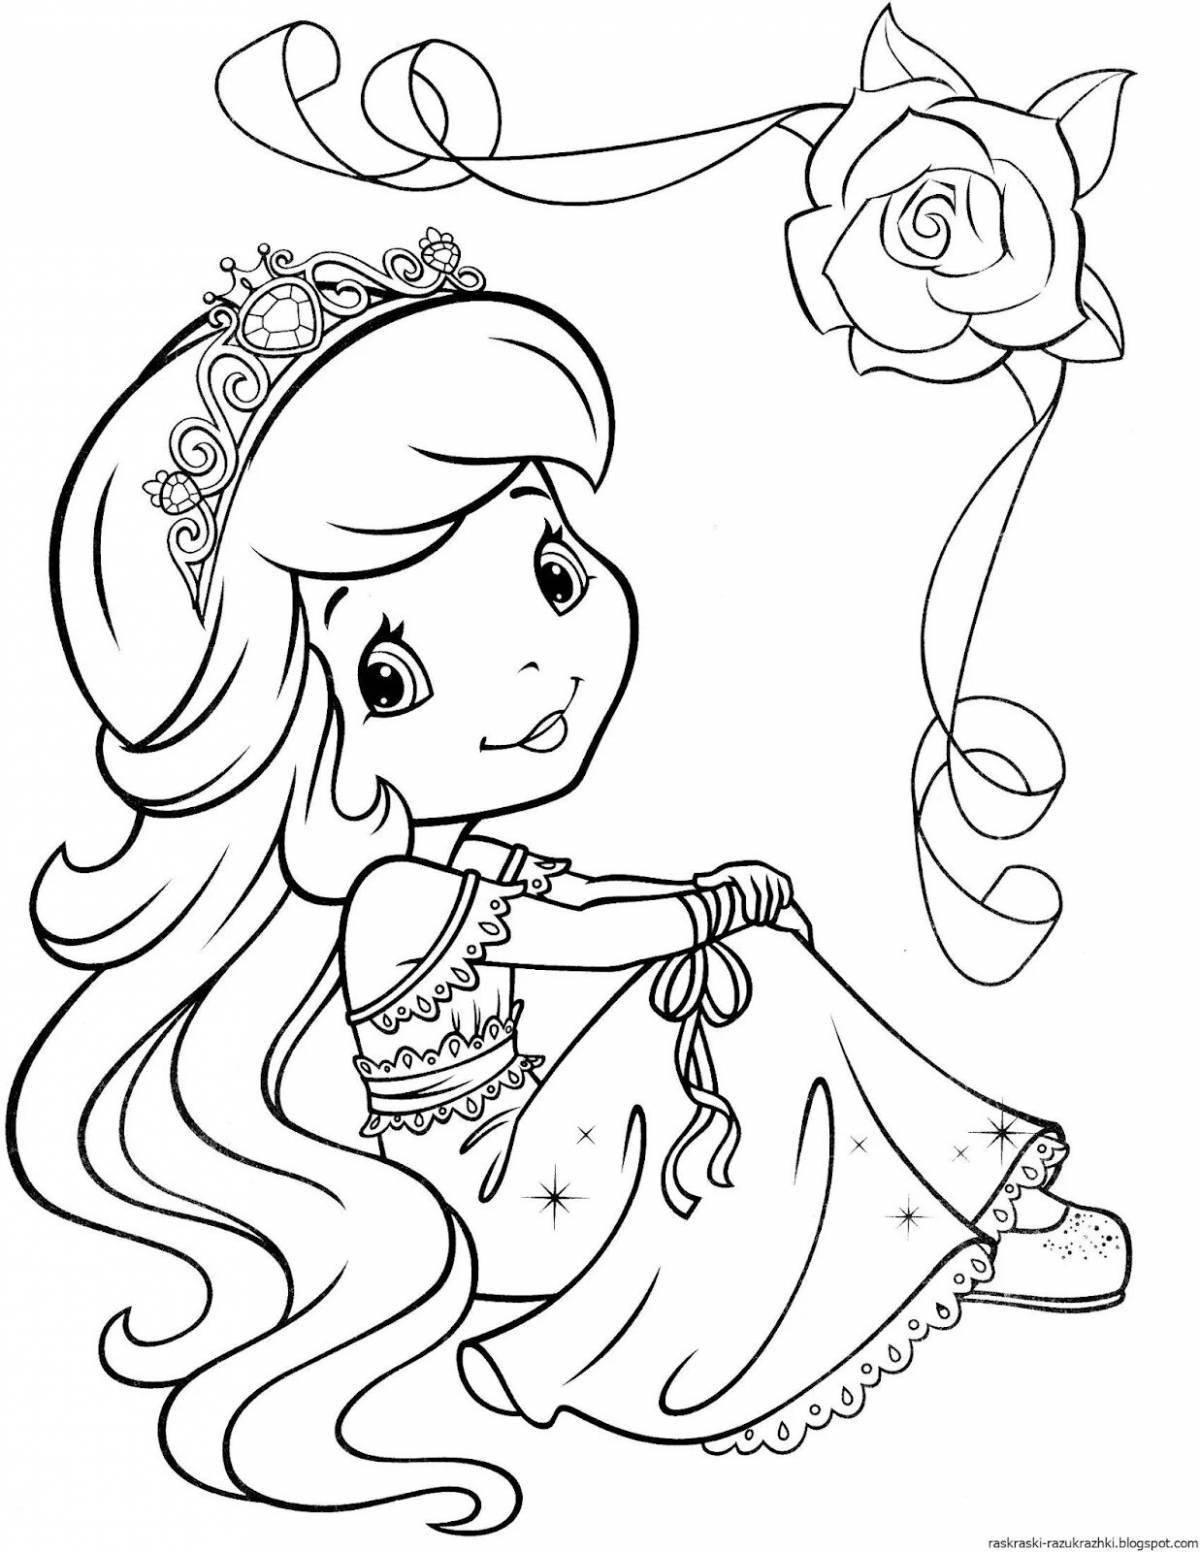 Live coloring for girls princesses 5-6 years old